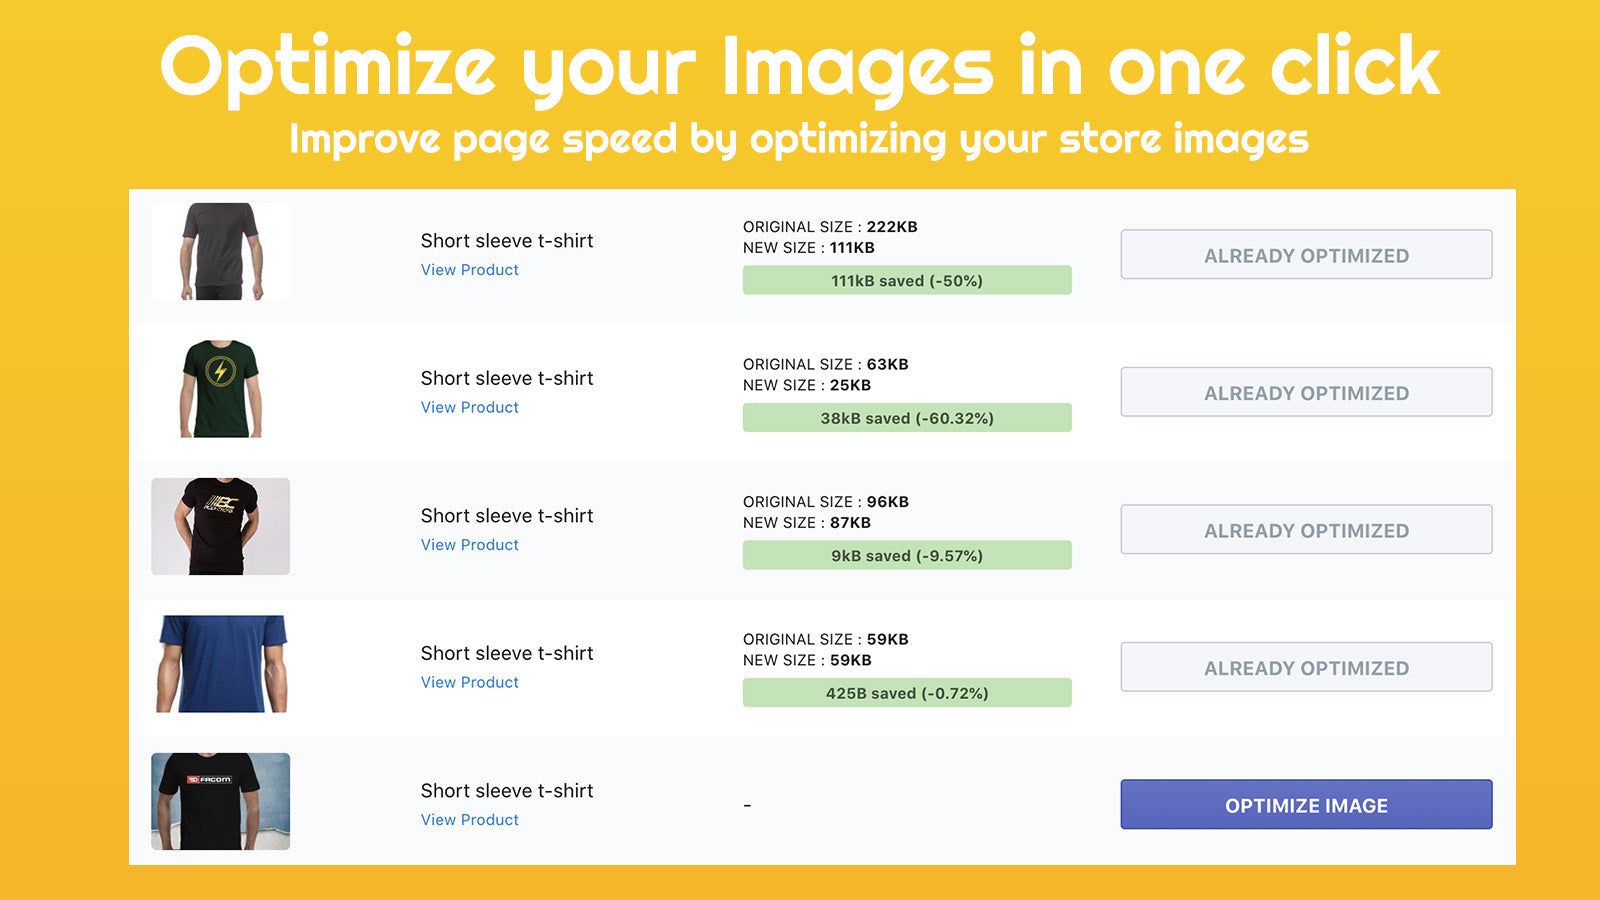 Optimize your images